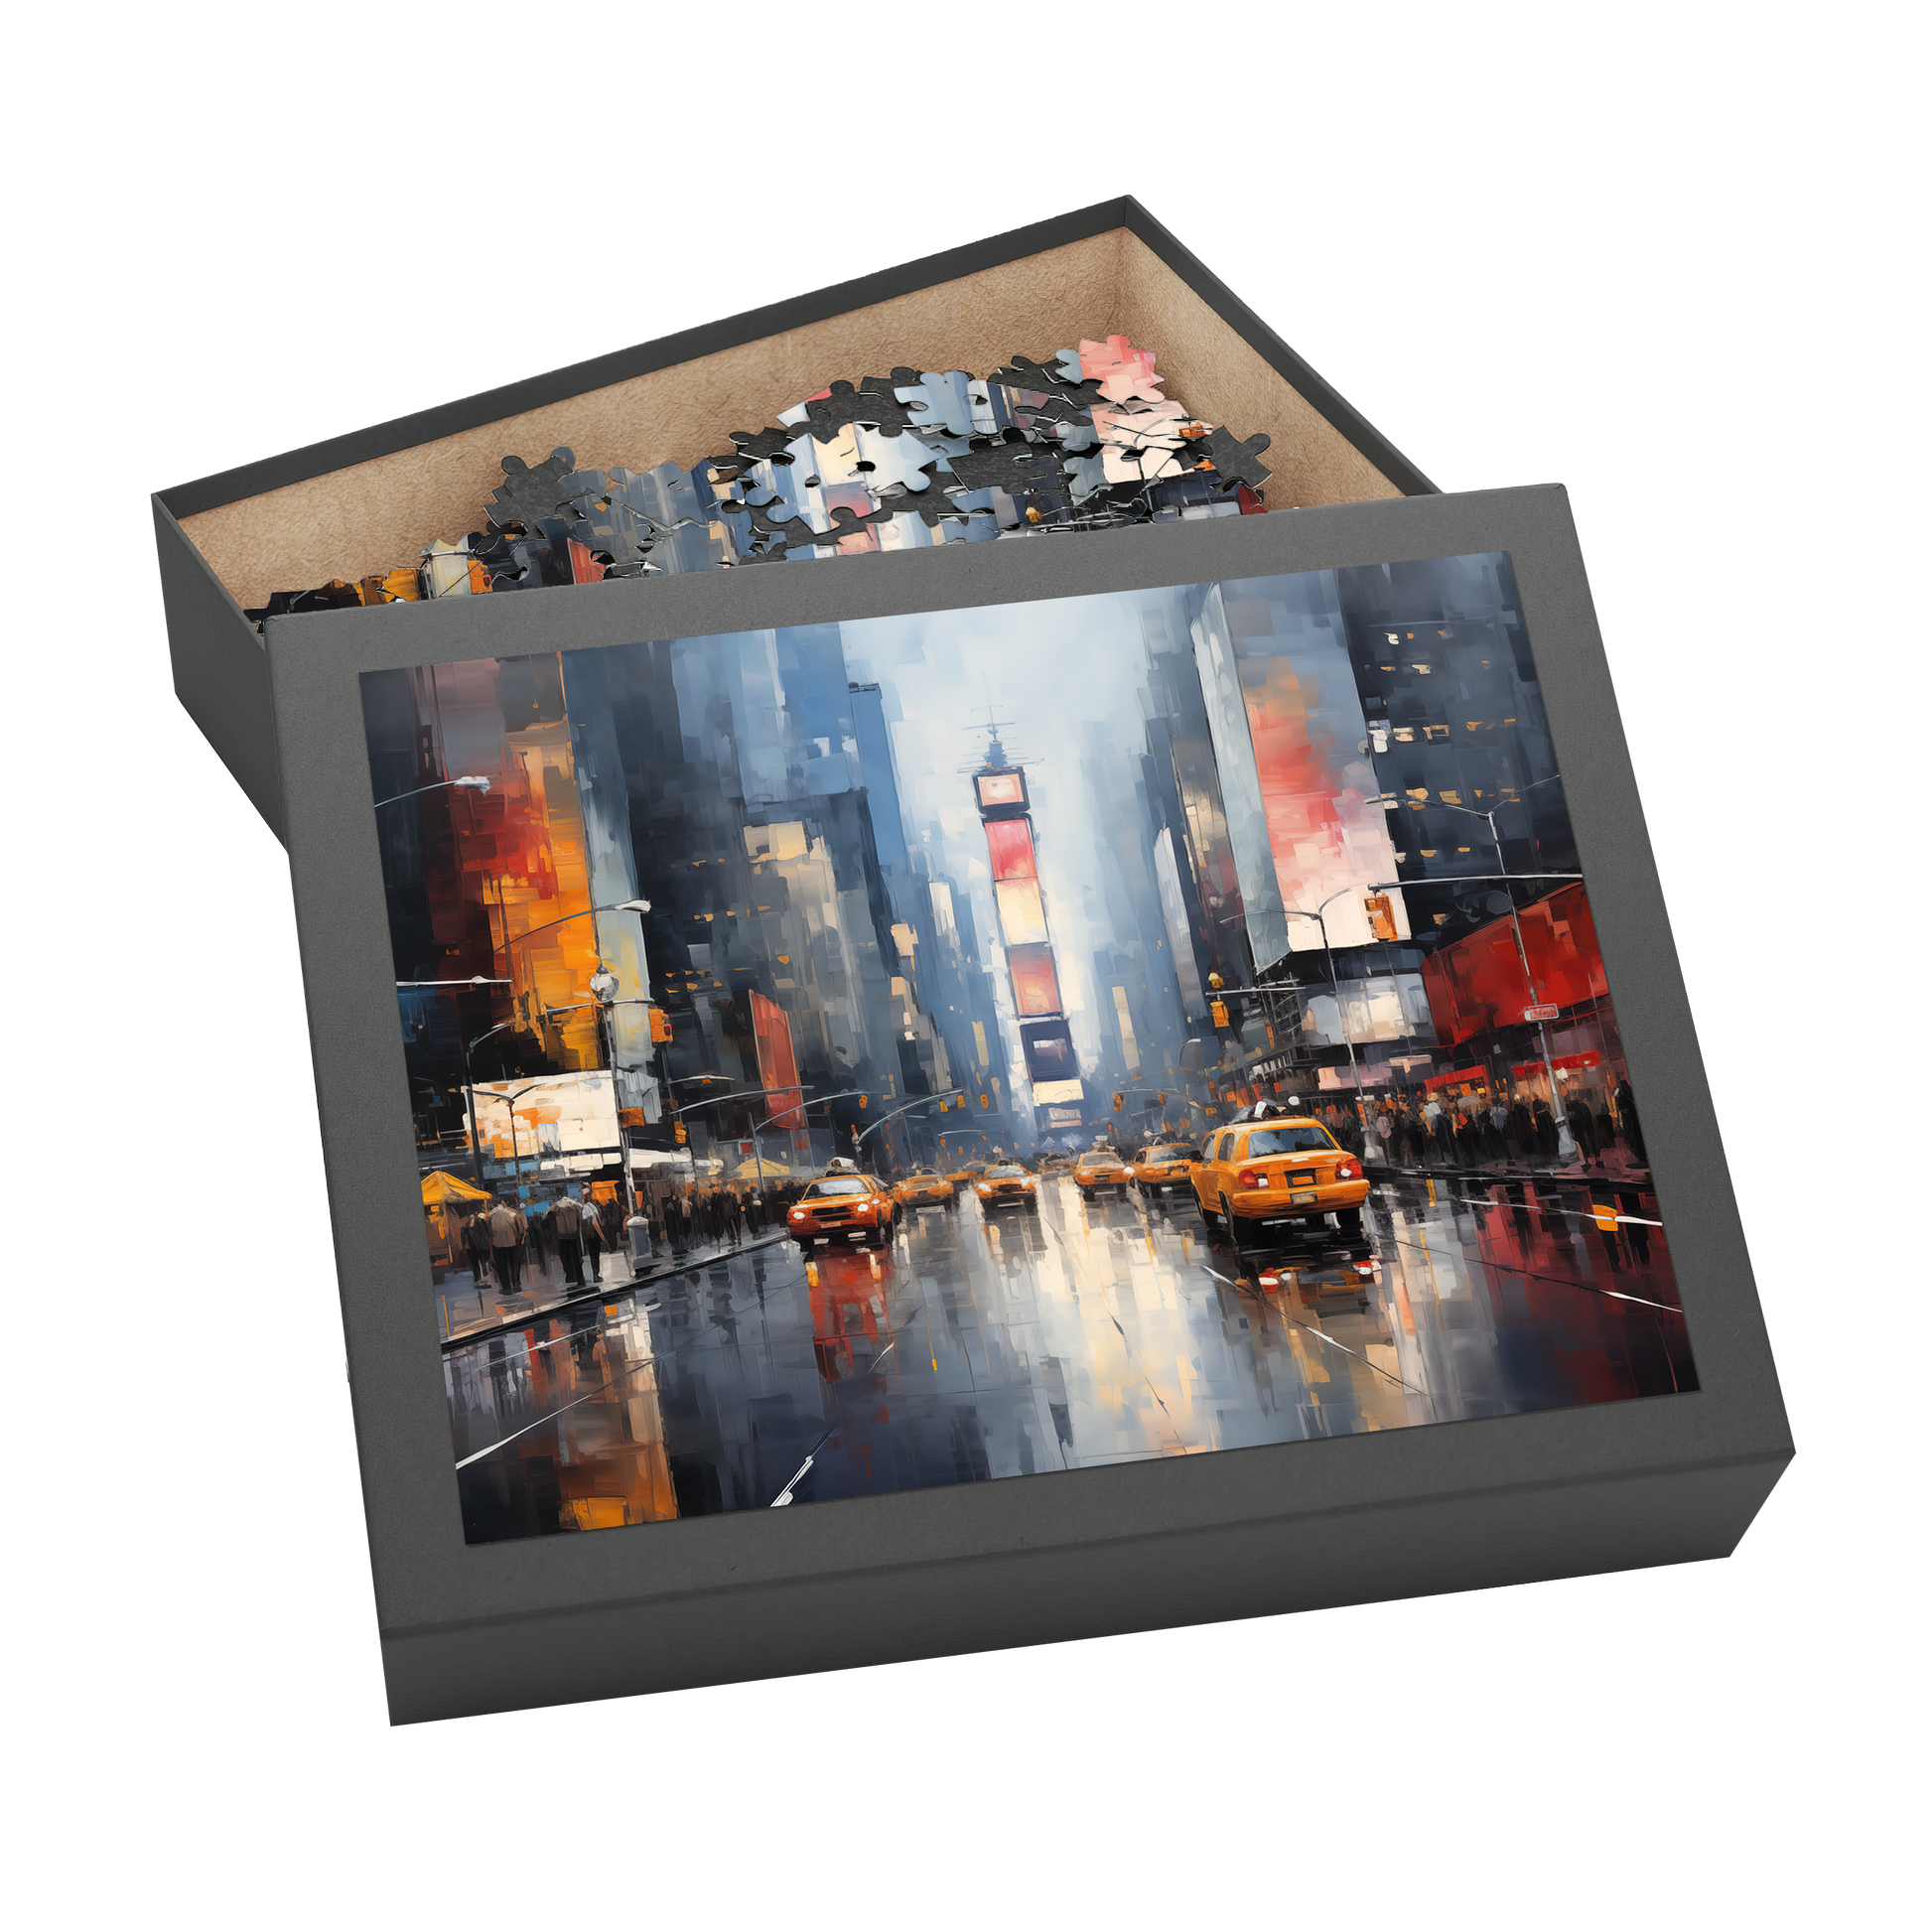 Downtown - Premium Jigsaw Puzzle - Urban, Dynamic, Reflections, Traffic - Multiple Sizes Available